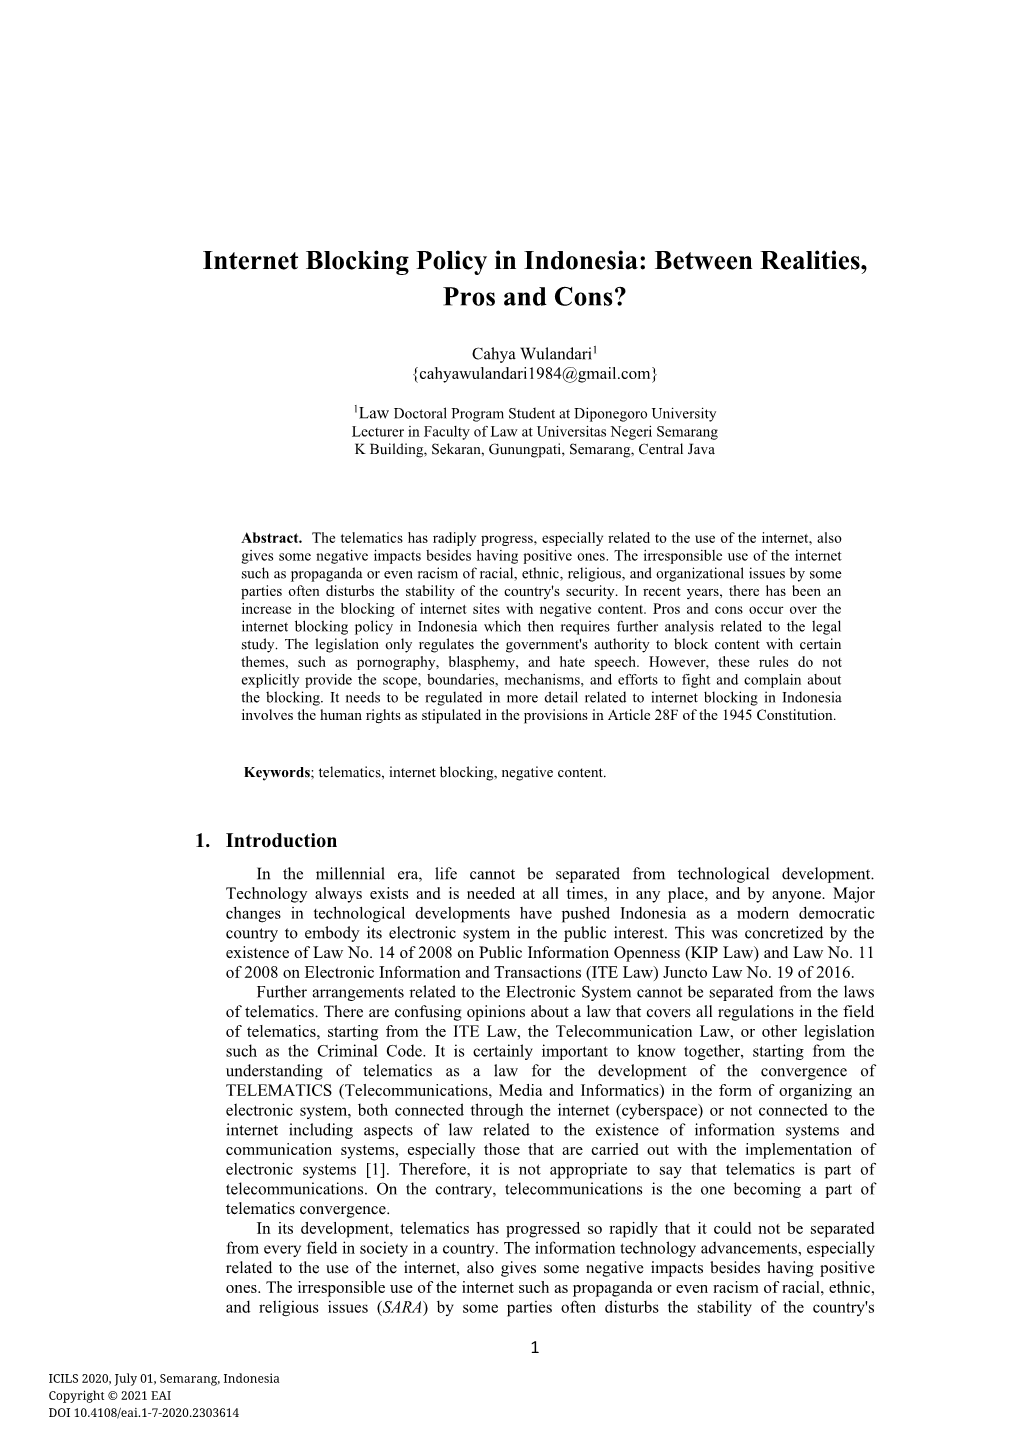 Internet Blocking Policy in Indonesia: Between Realities, Pros and Cons?